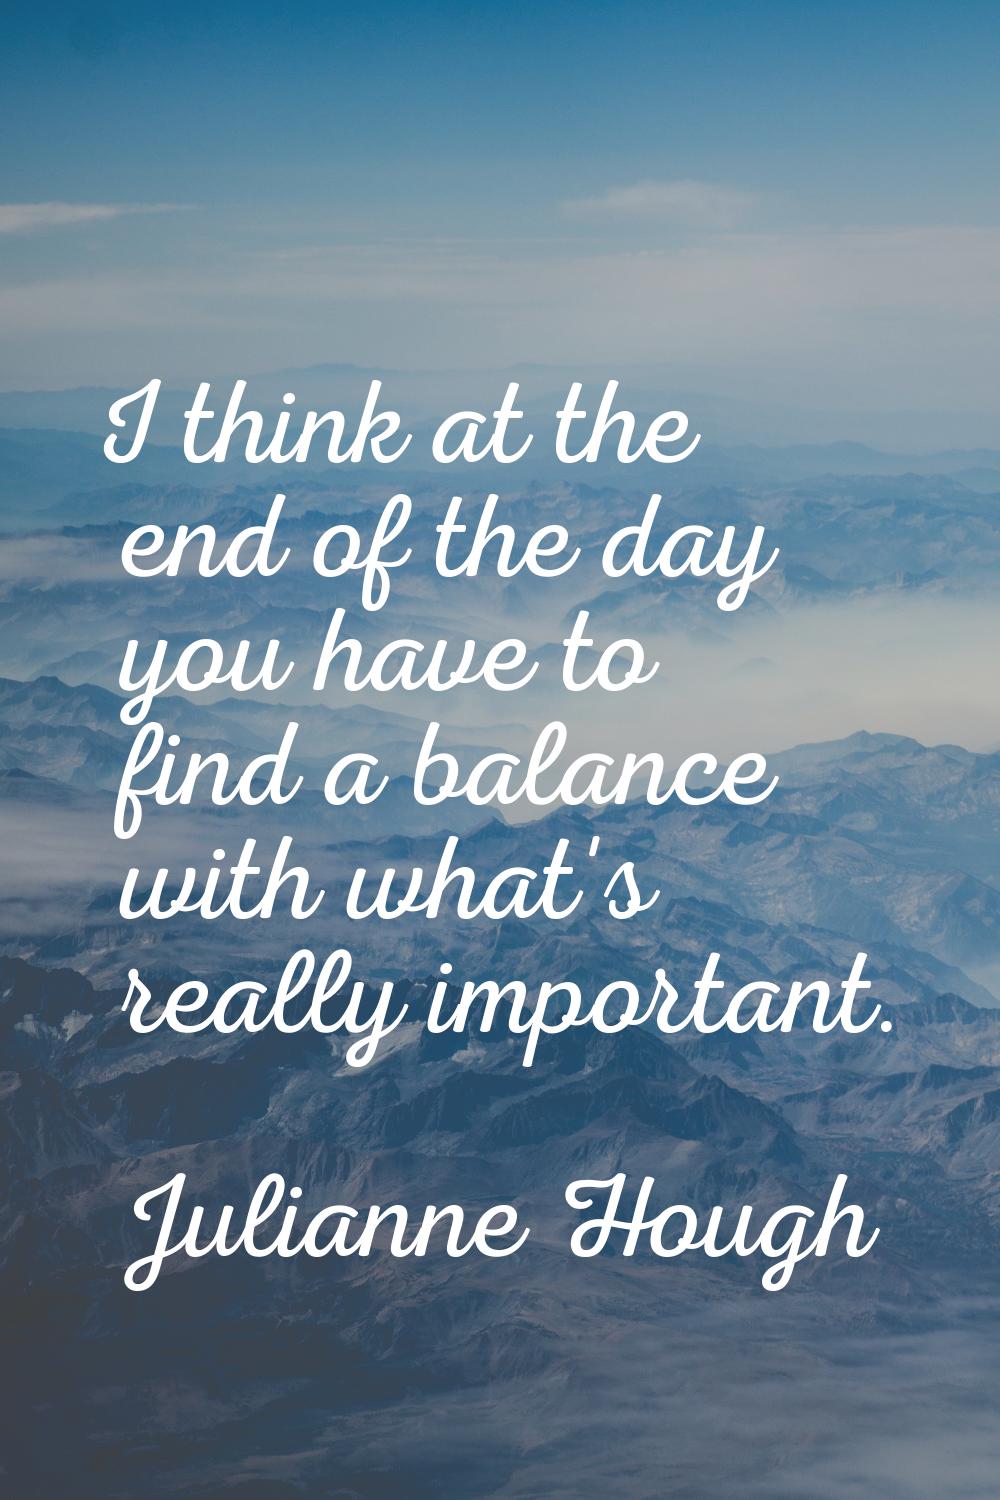 I think at the end of the day you have to find a balance with what's really important.